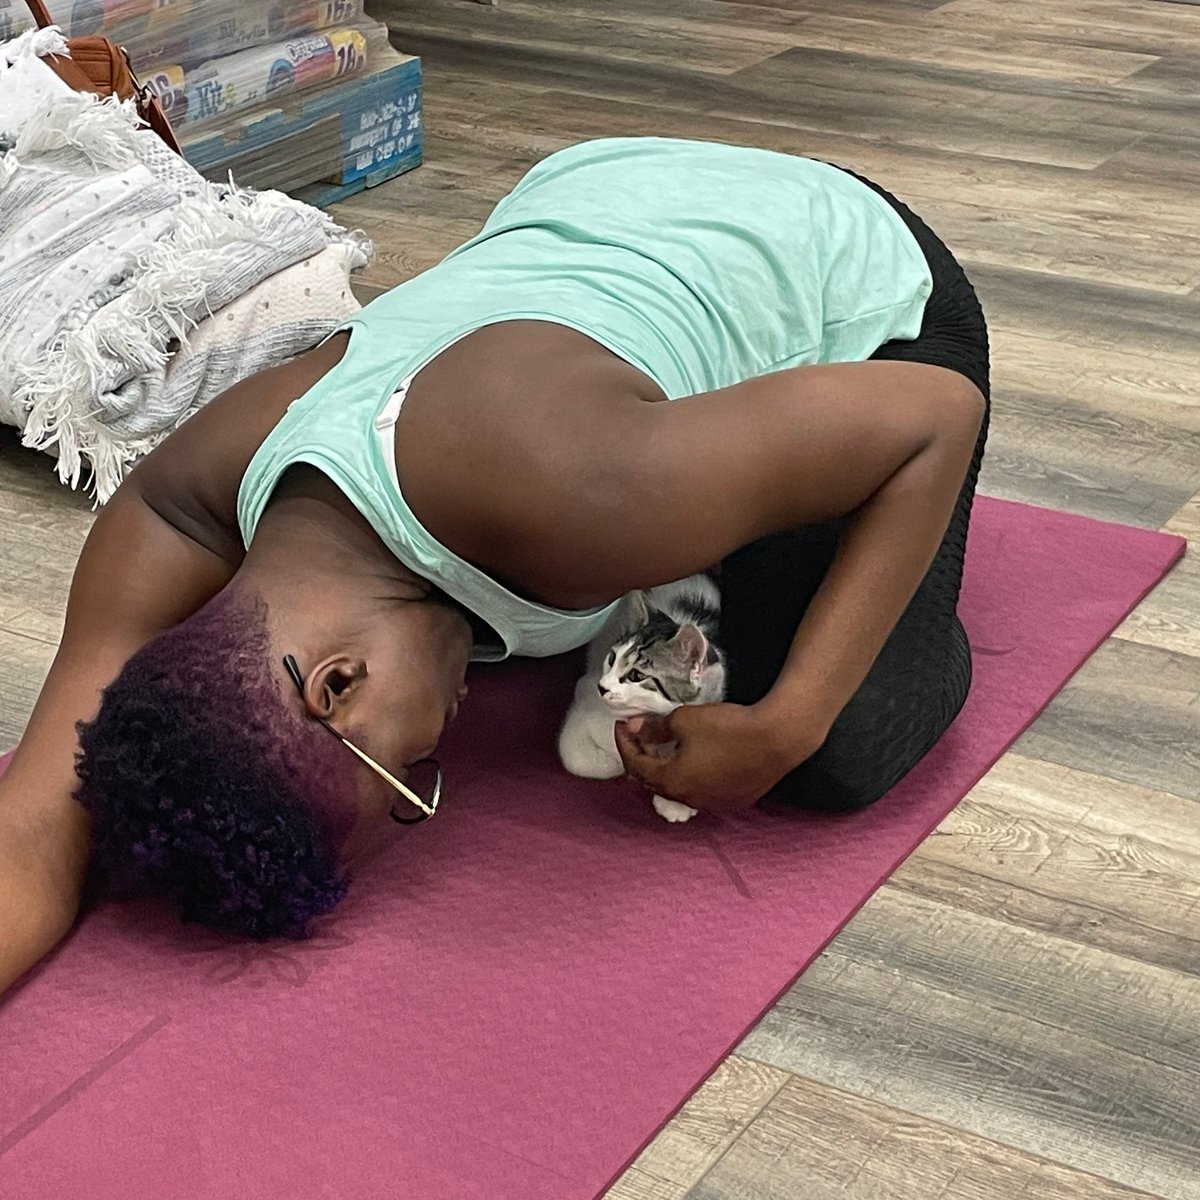 Happy International Yoga Day! 
Our adoptable kittens Tina and Jessie had so much fun at yesterdays Namastray Yoga session. Our yoga sessions held at our Community Center led by Liana Bryant of Rosemary Court Yoga are a super fun zen way to support Cat Depot. https://t.co/LJspXy9m80